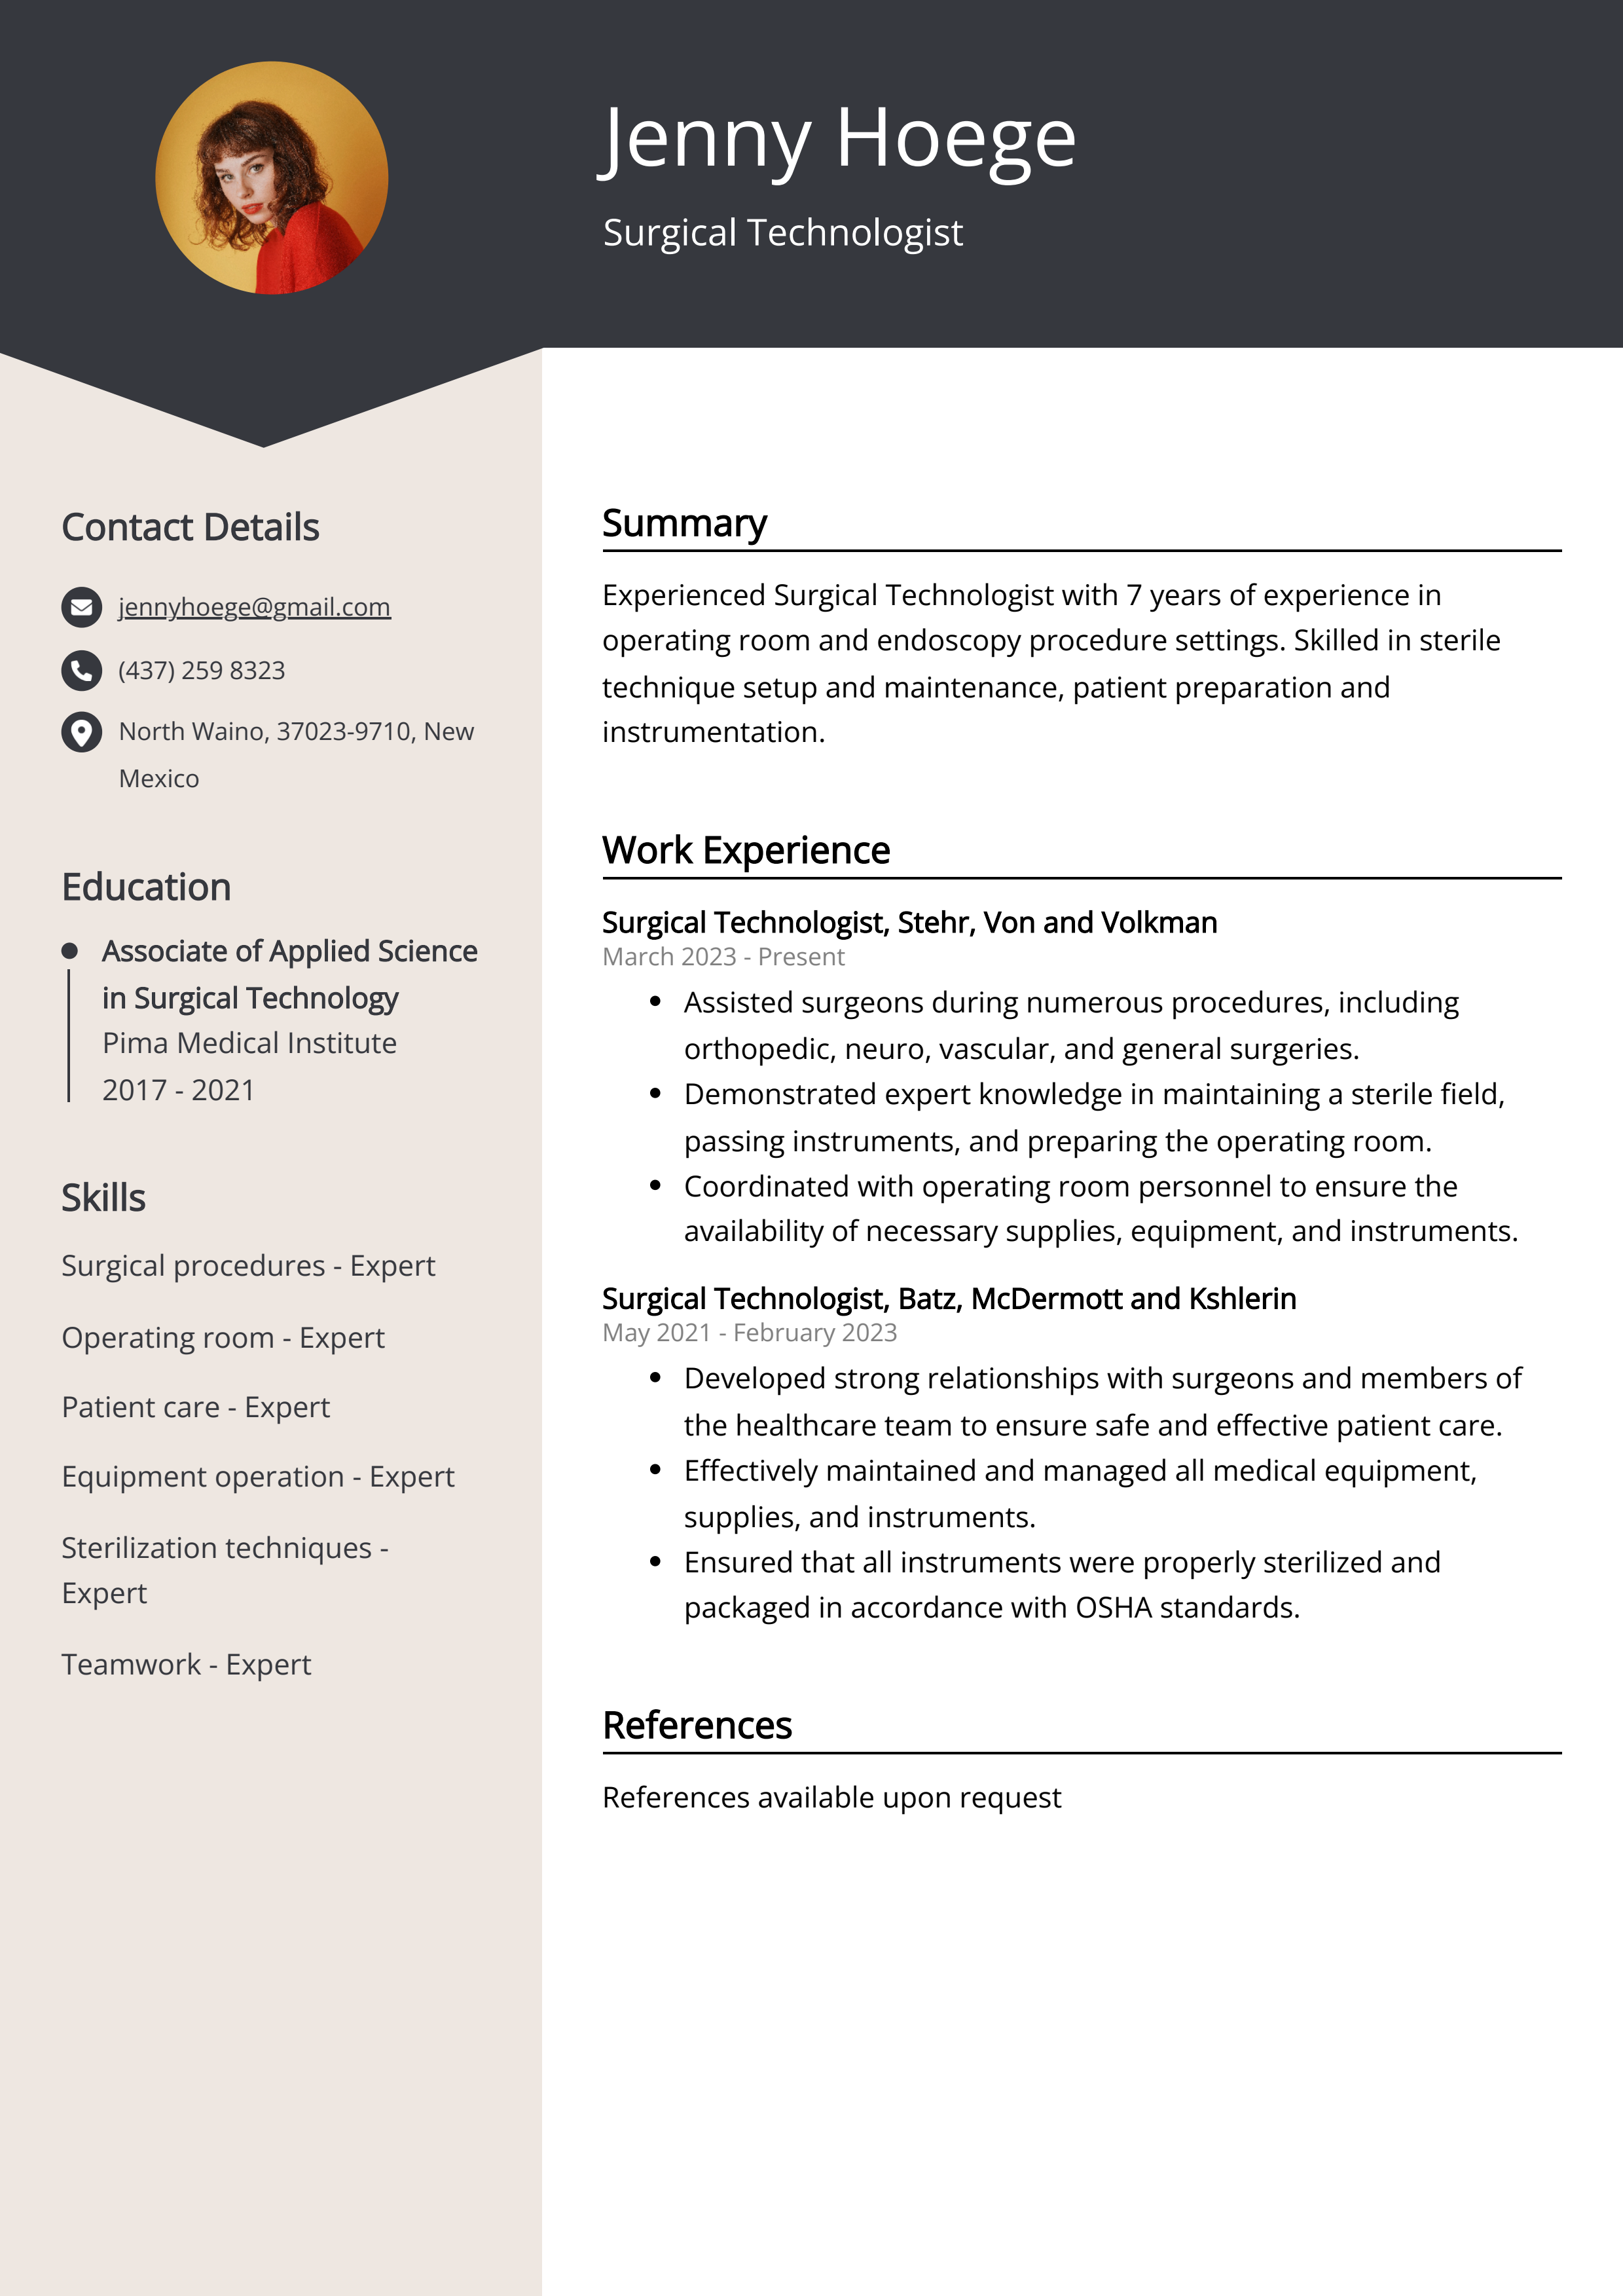 Surgical Technologist CV Example